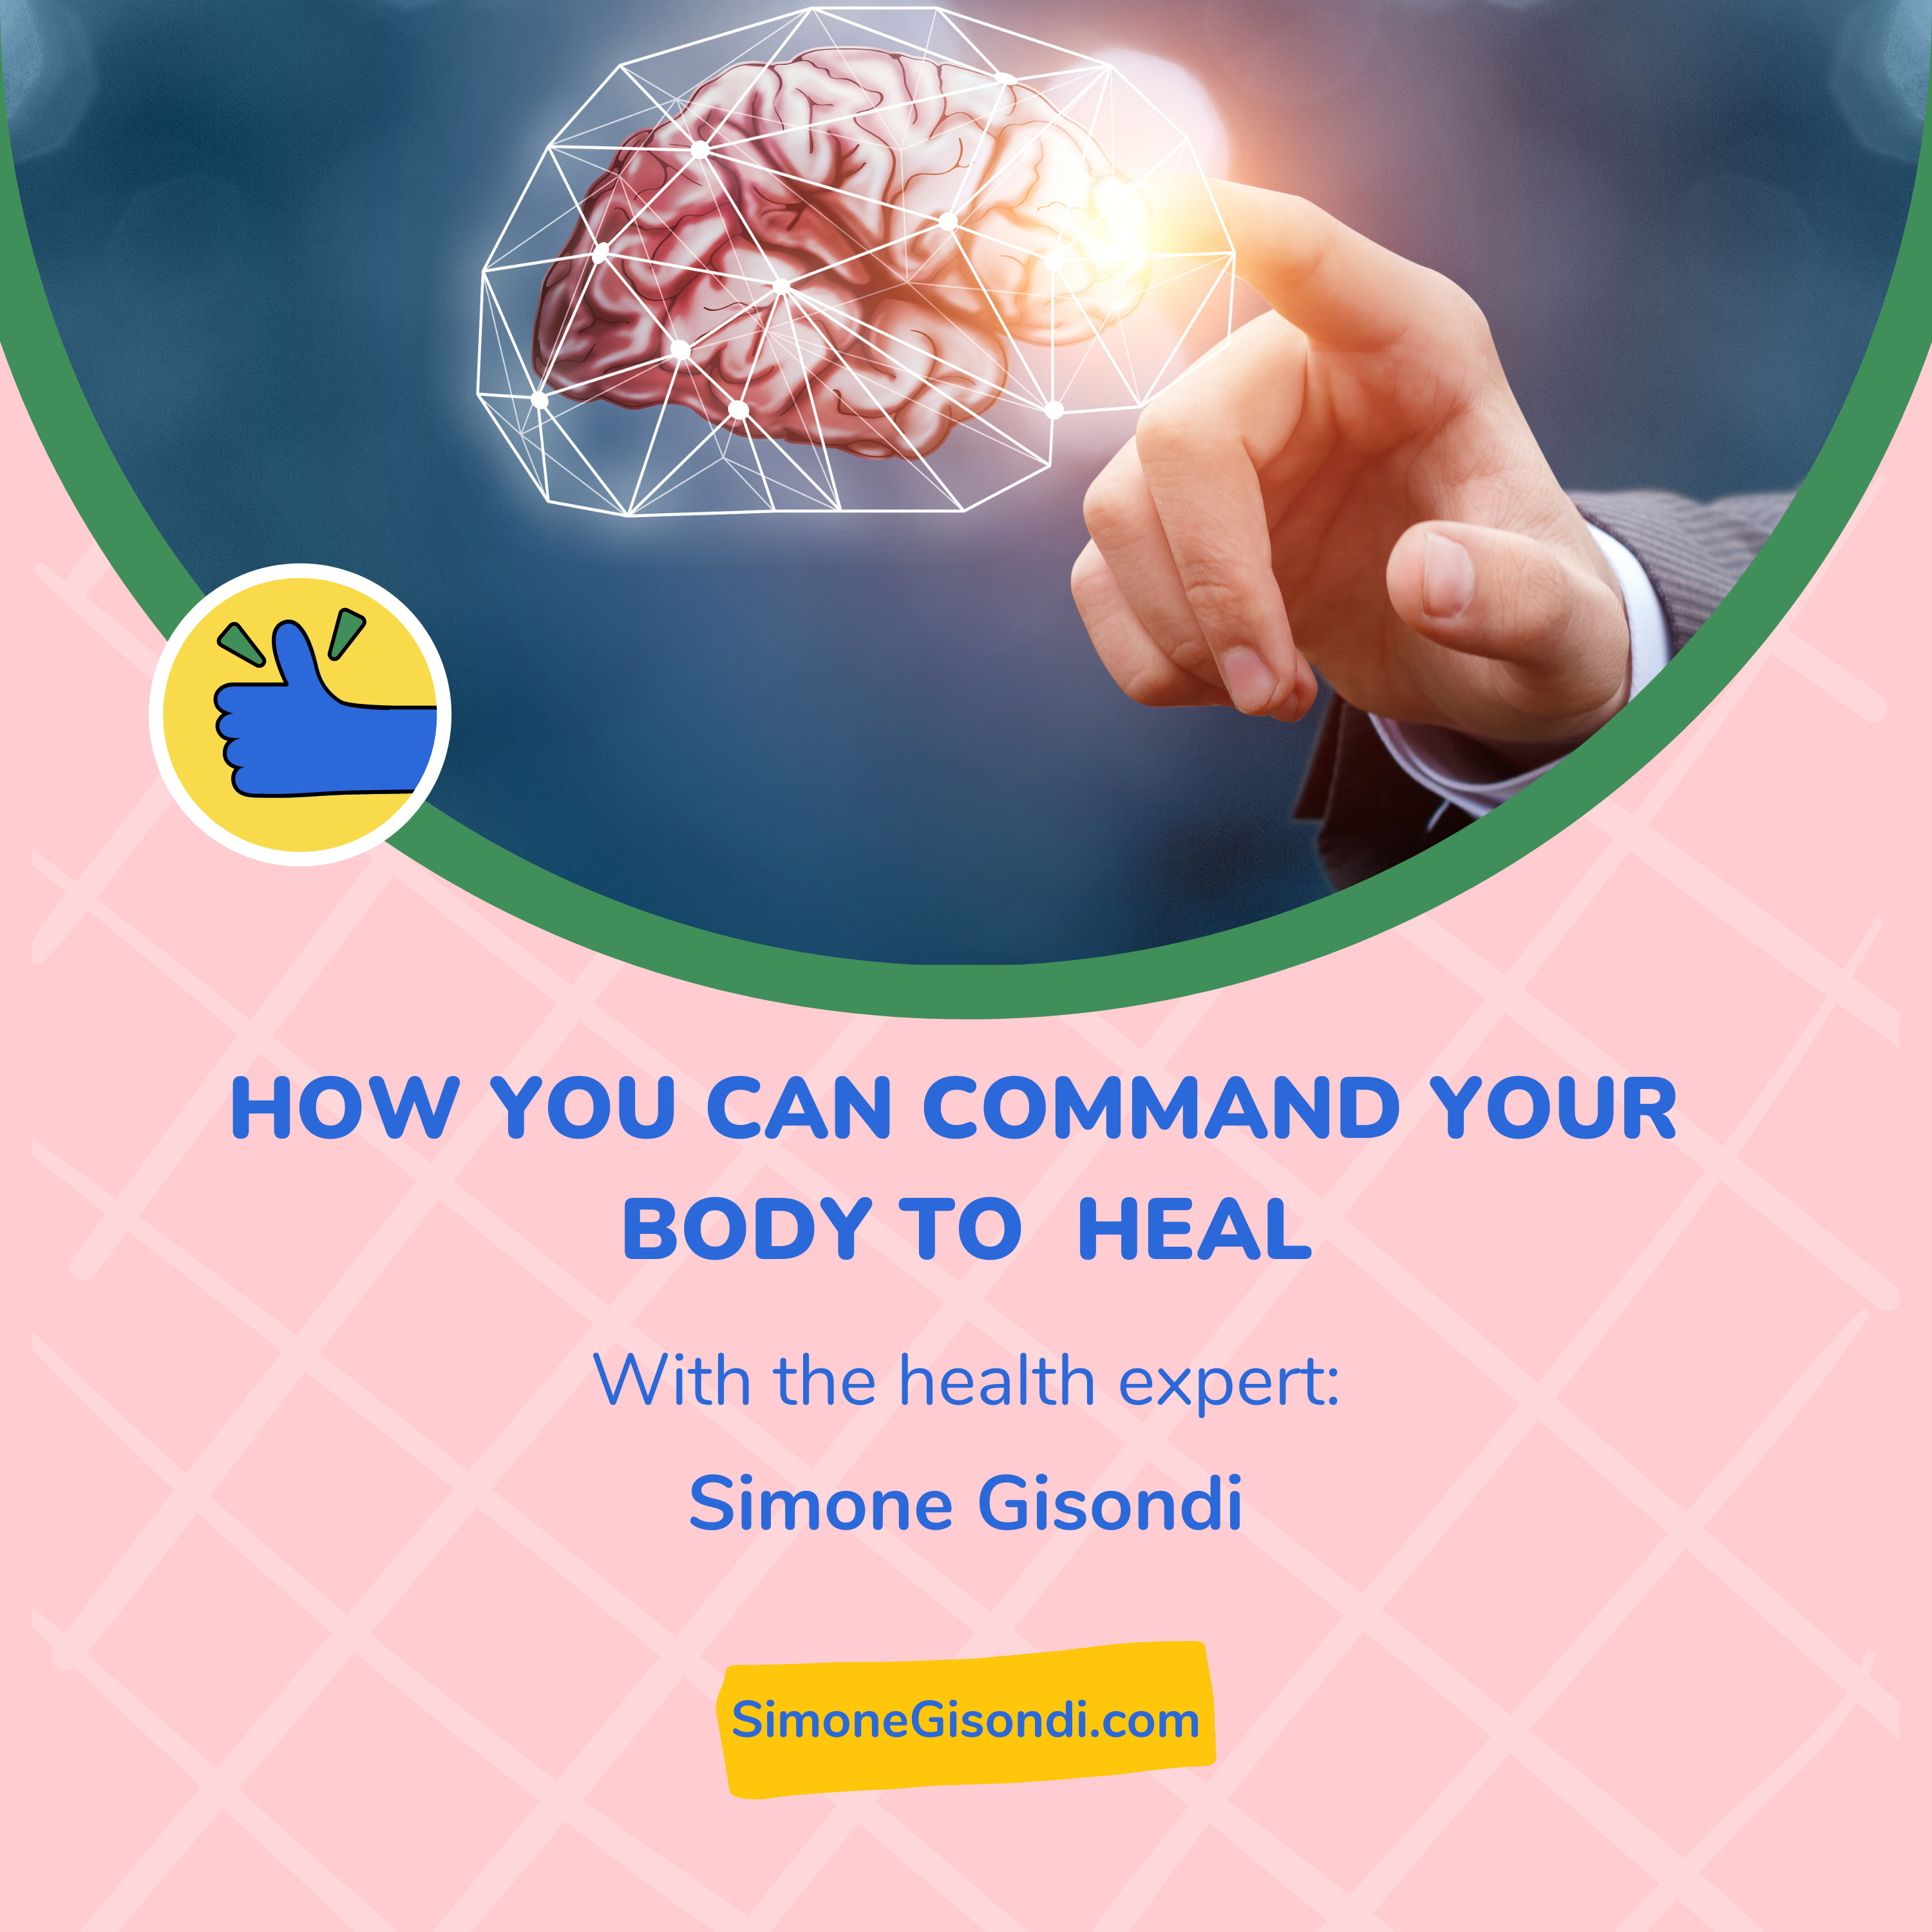 How you can talk to your body to command it to heal